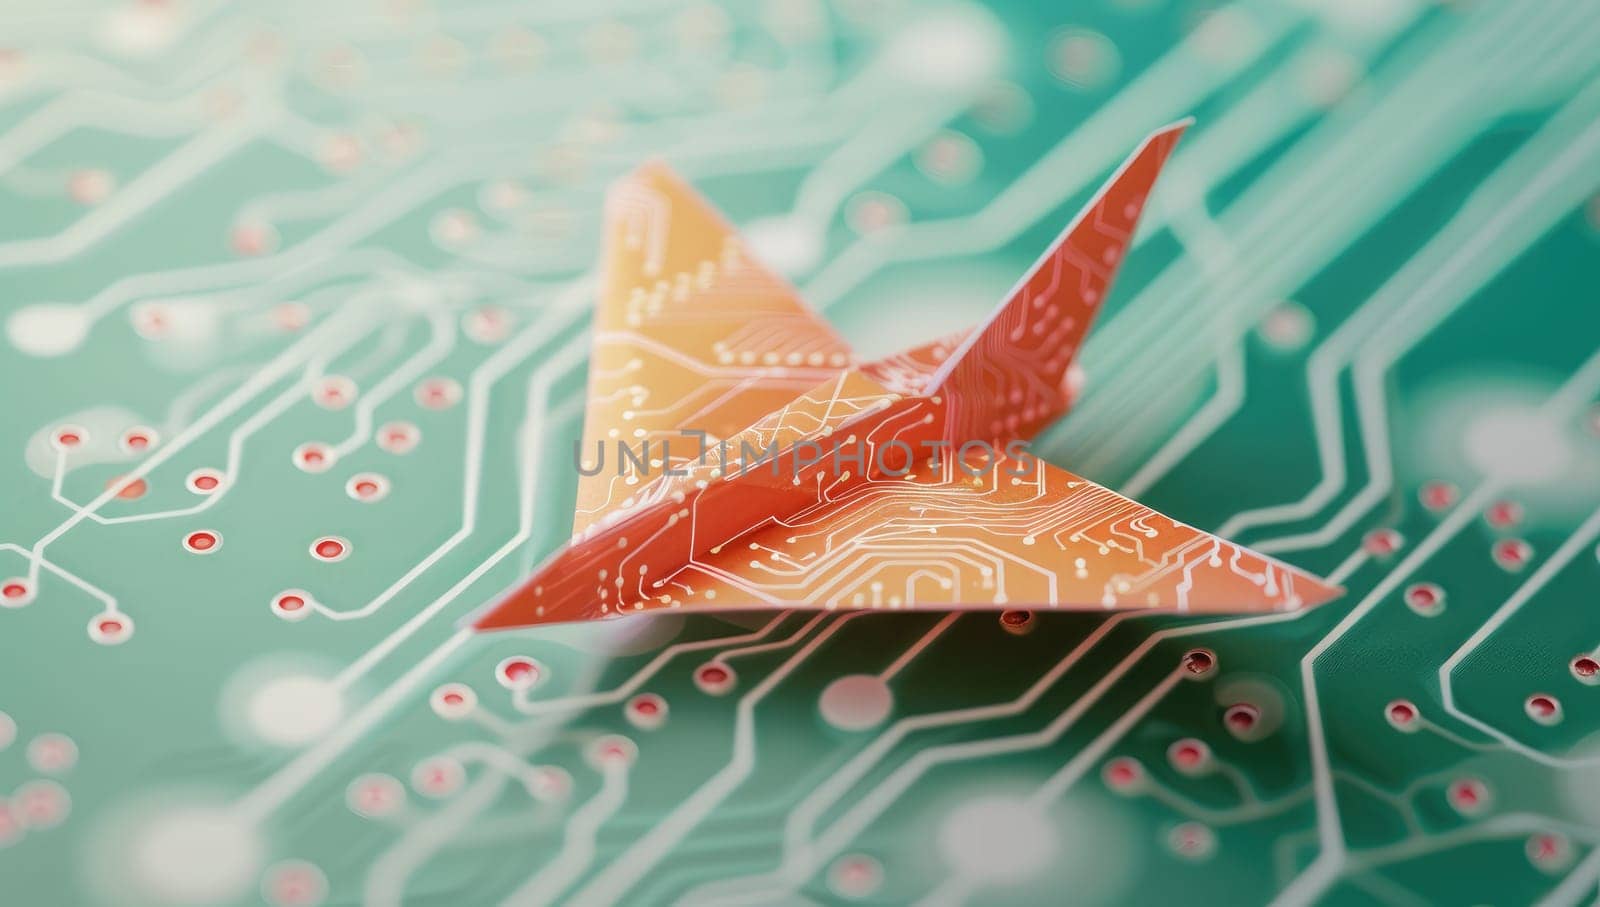 Paper Plane on Electronic Circuit Board